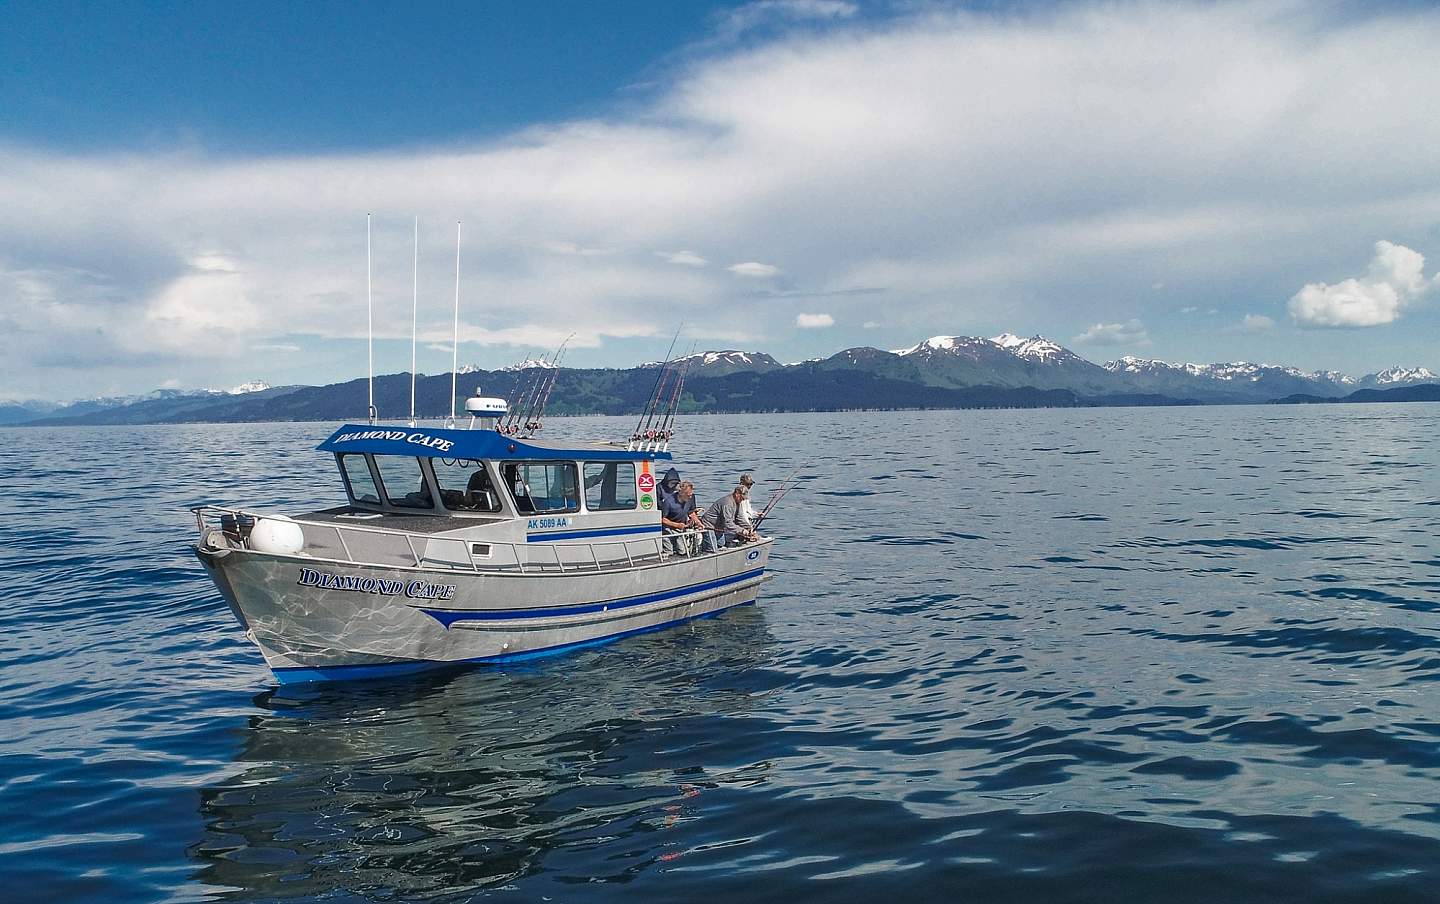 A small fishing boat on the water with mountains in the background.